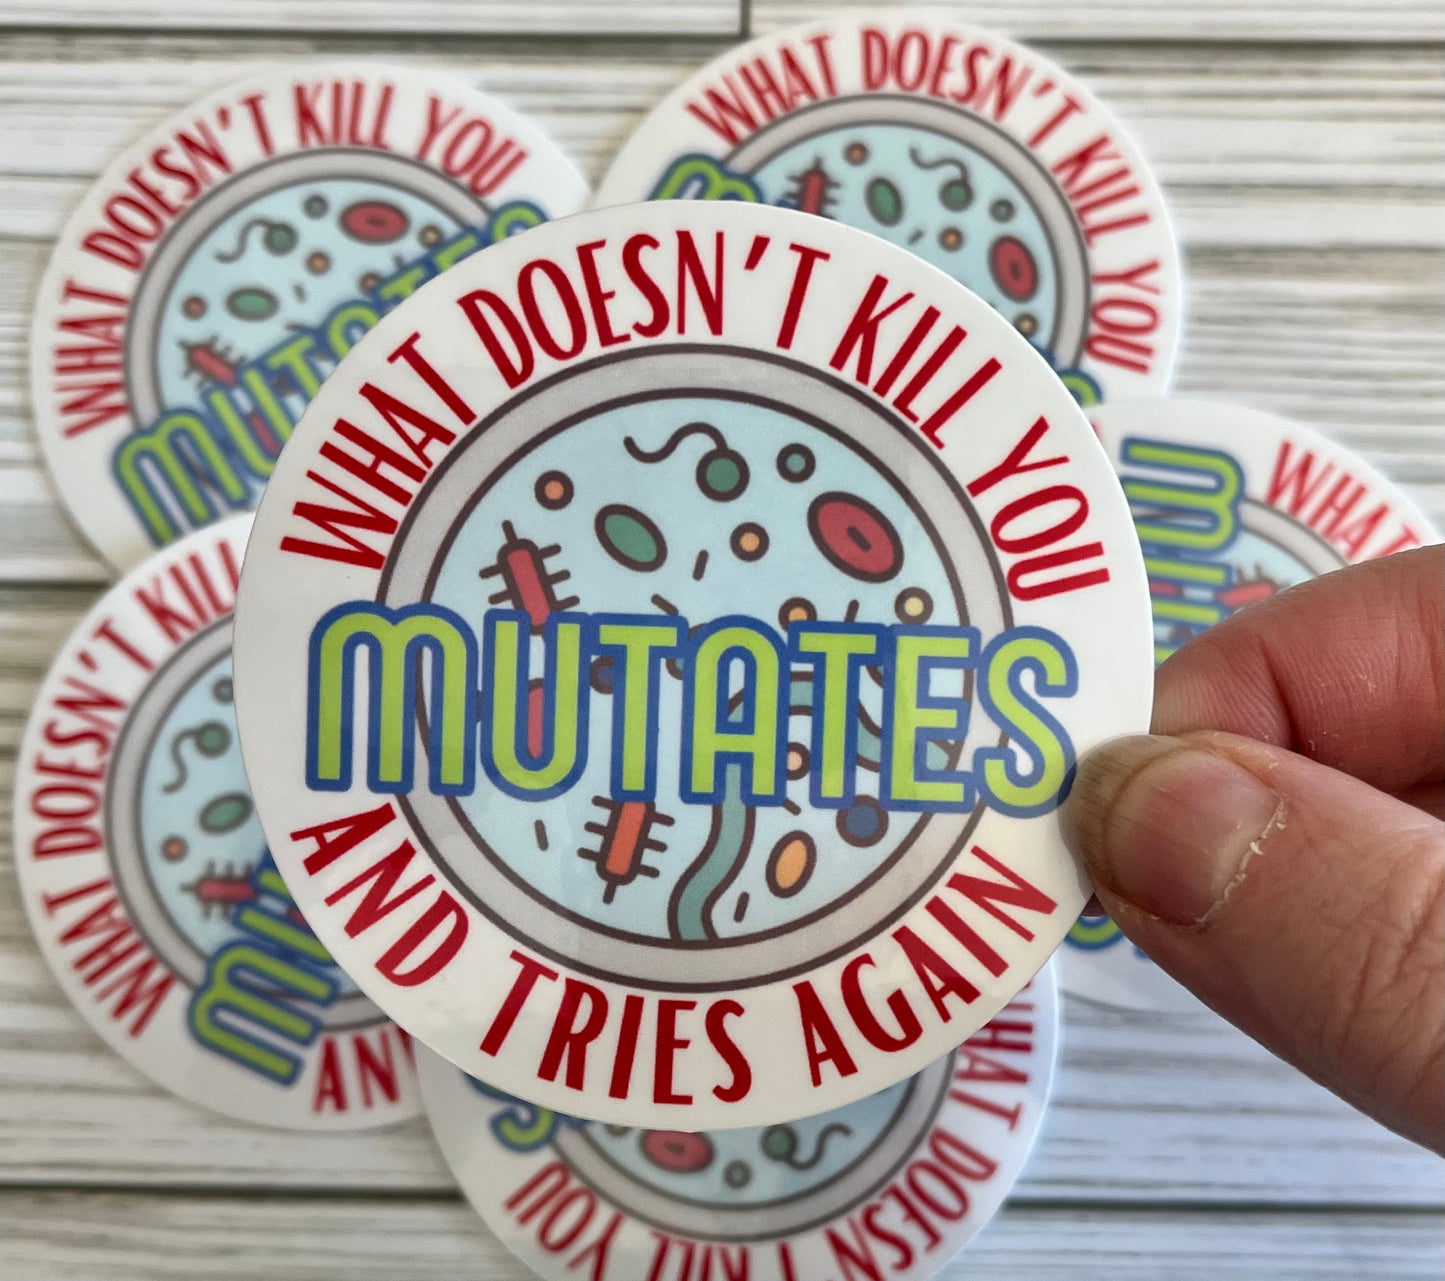 What Doesn't Kill You, Vinyl Sticker